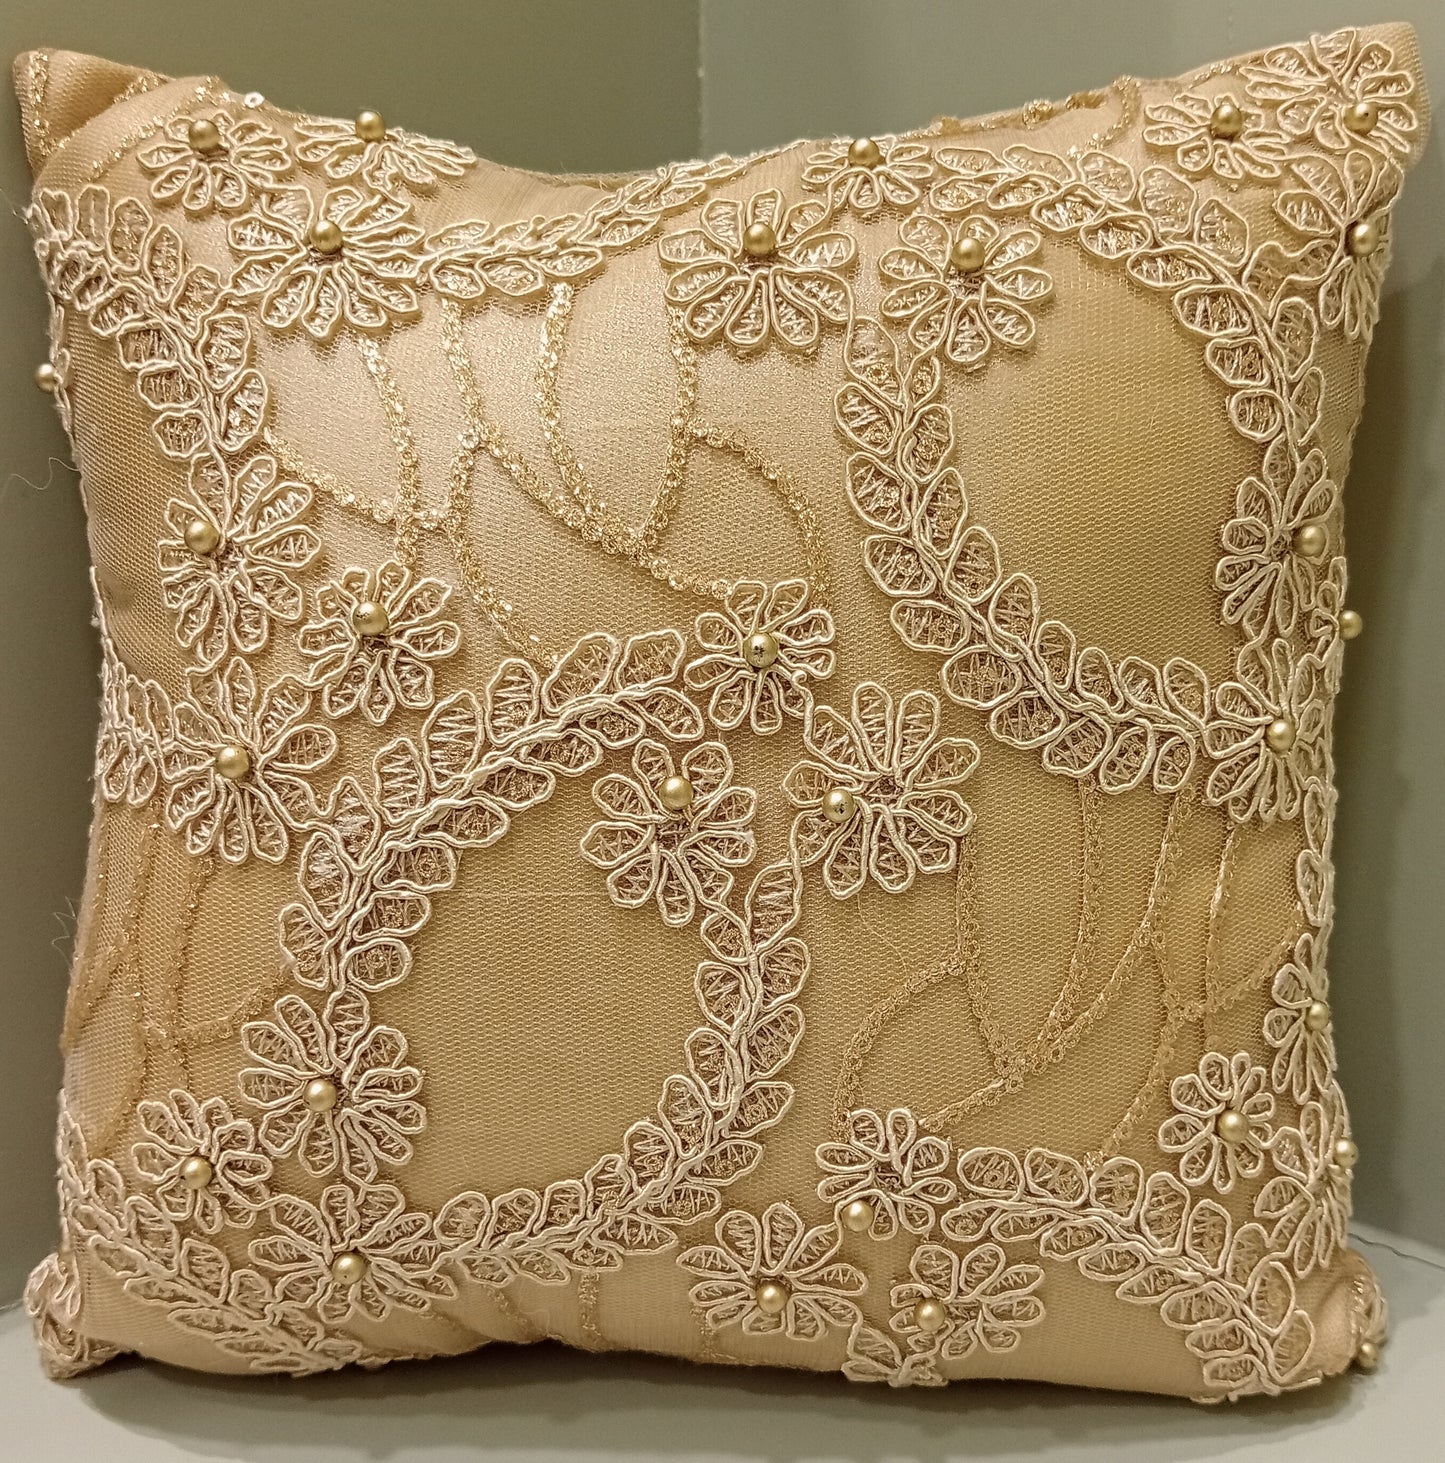 Embroidered floral design with pearls Cushion cover